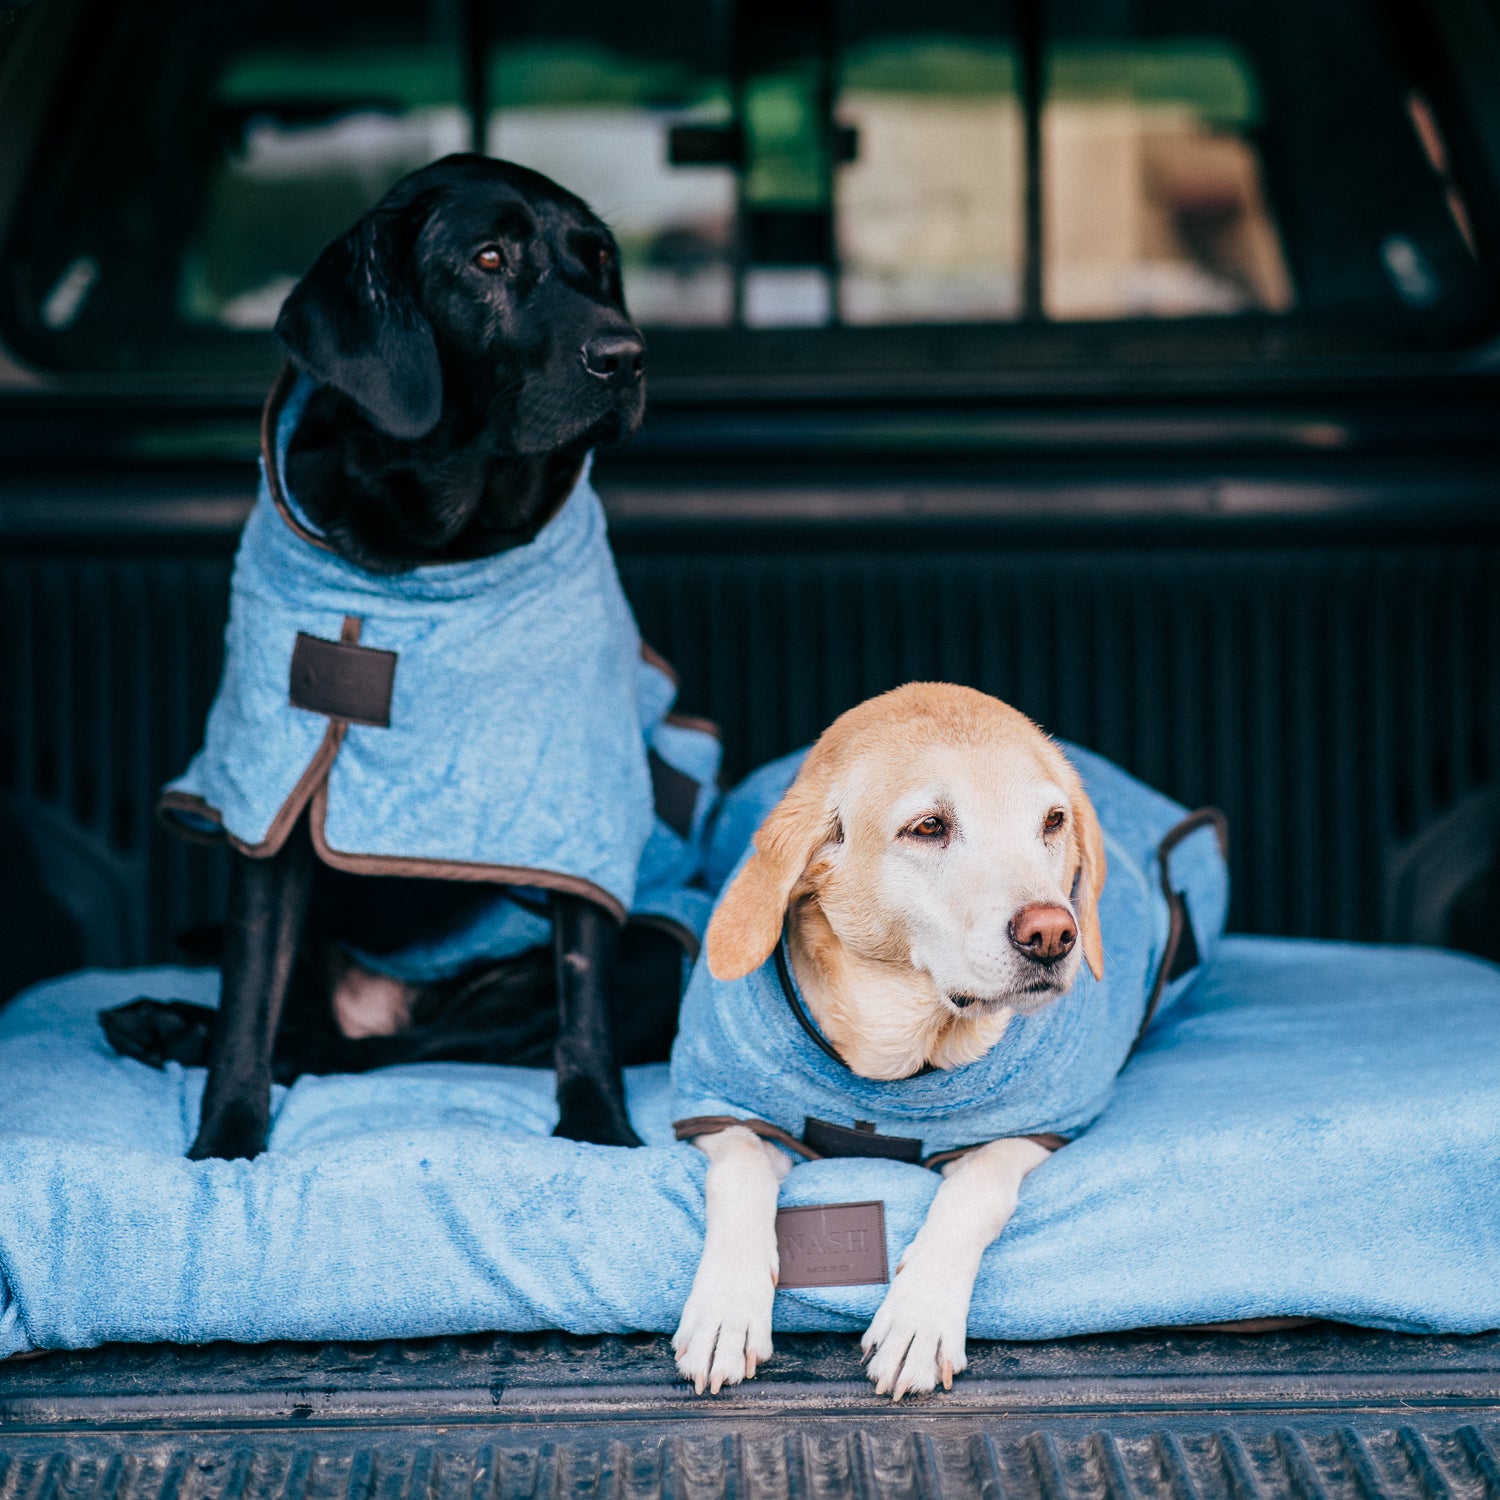 Two labradors sat on a blue dog bed in the boot of a car, wearing matching bamboo dog drying coats, also in blue.